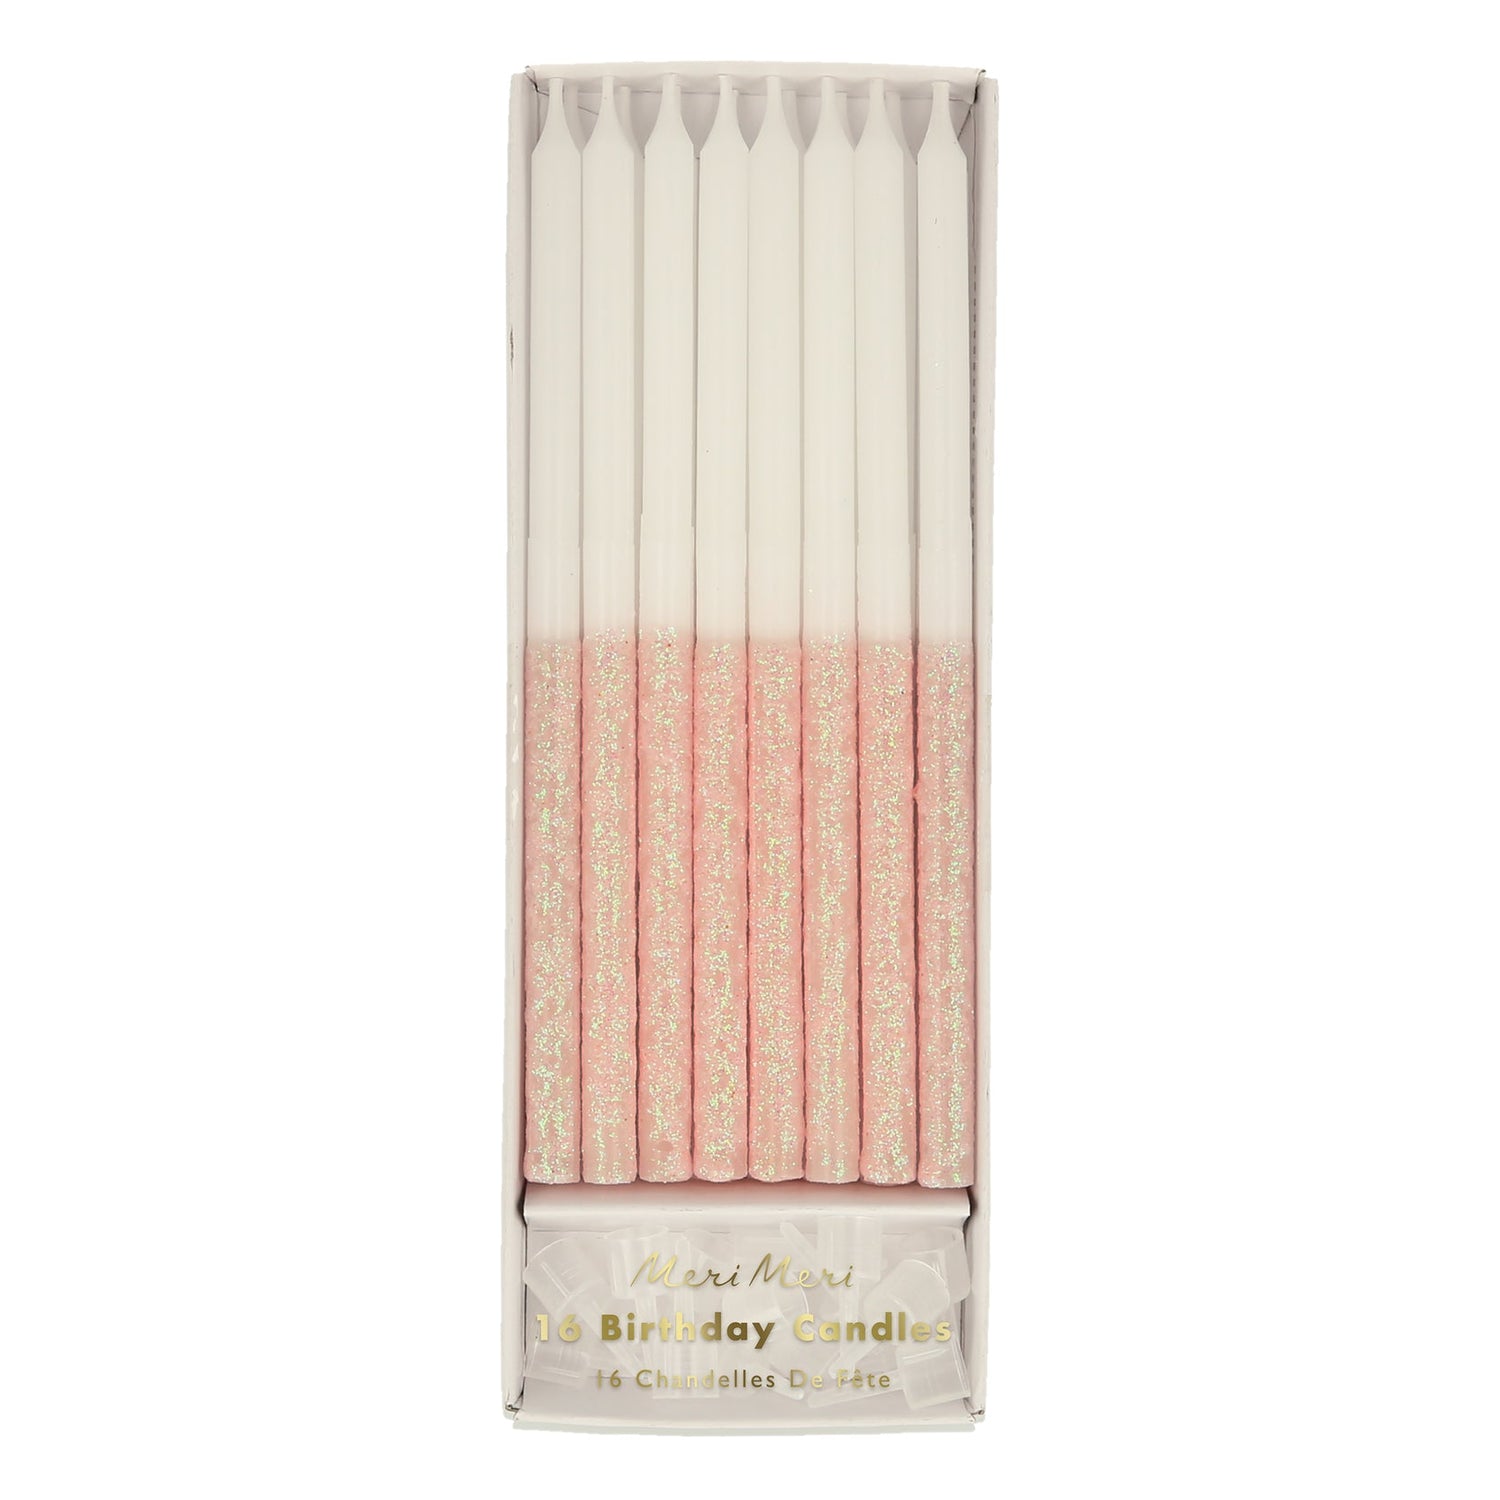 A pack of 16 Pale Pink Glitter Dipped Candles by Meri Meri.